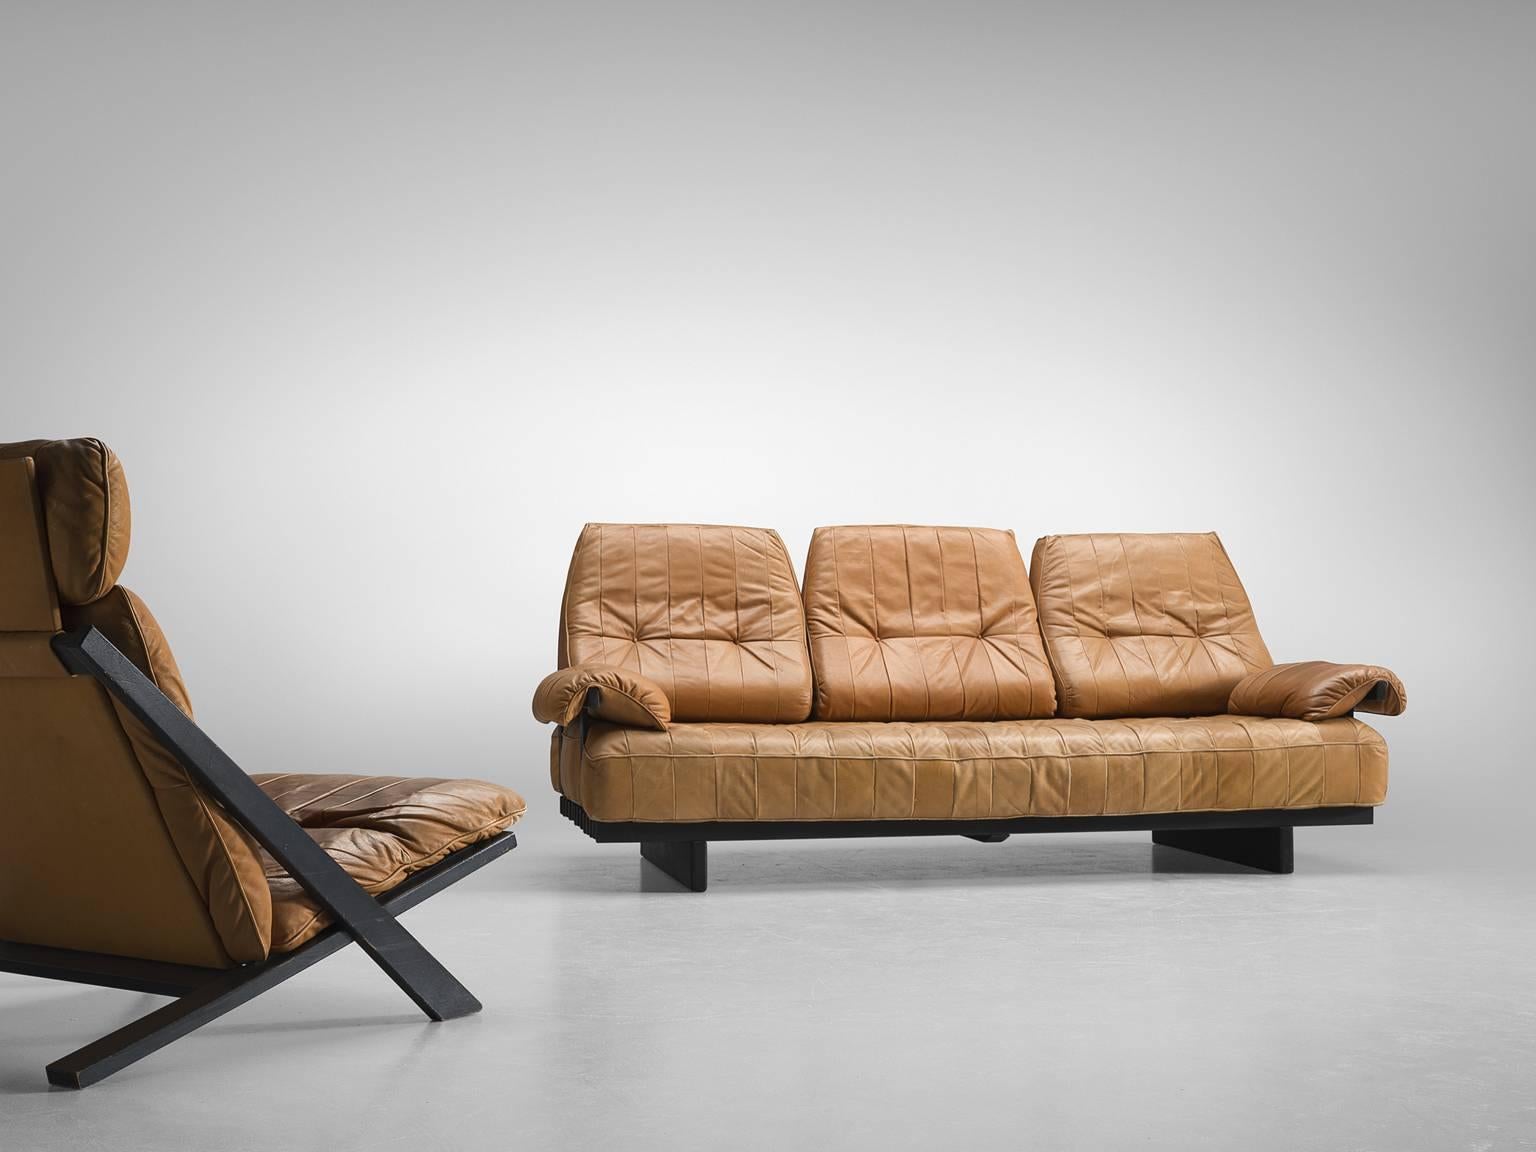 Swiss Ueli Berger Lounge Chair and DS 80 Sofa by De Sede